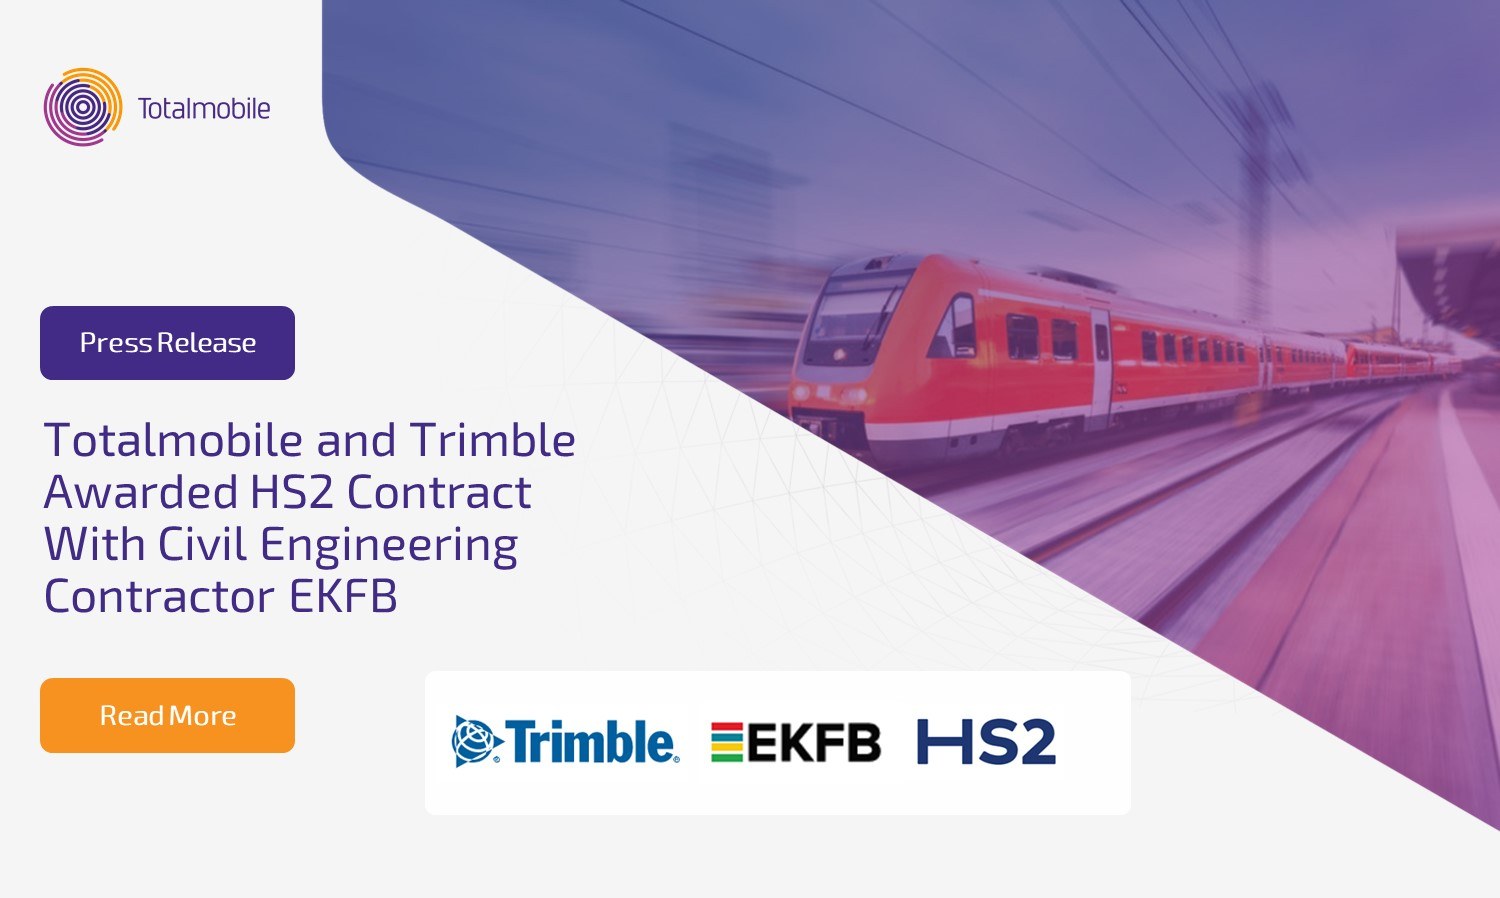 Totalmobile and Trimble Awarded HS2 Contract from Civil Engineering Contractor EKFB